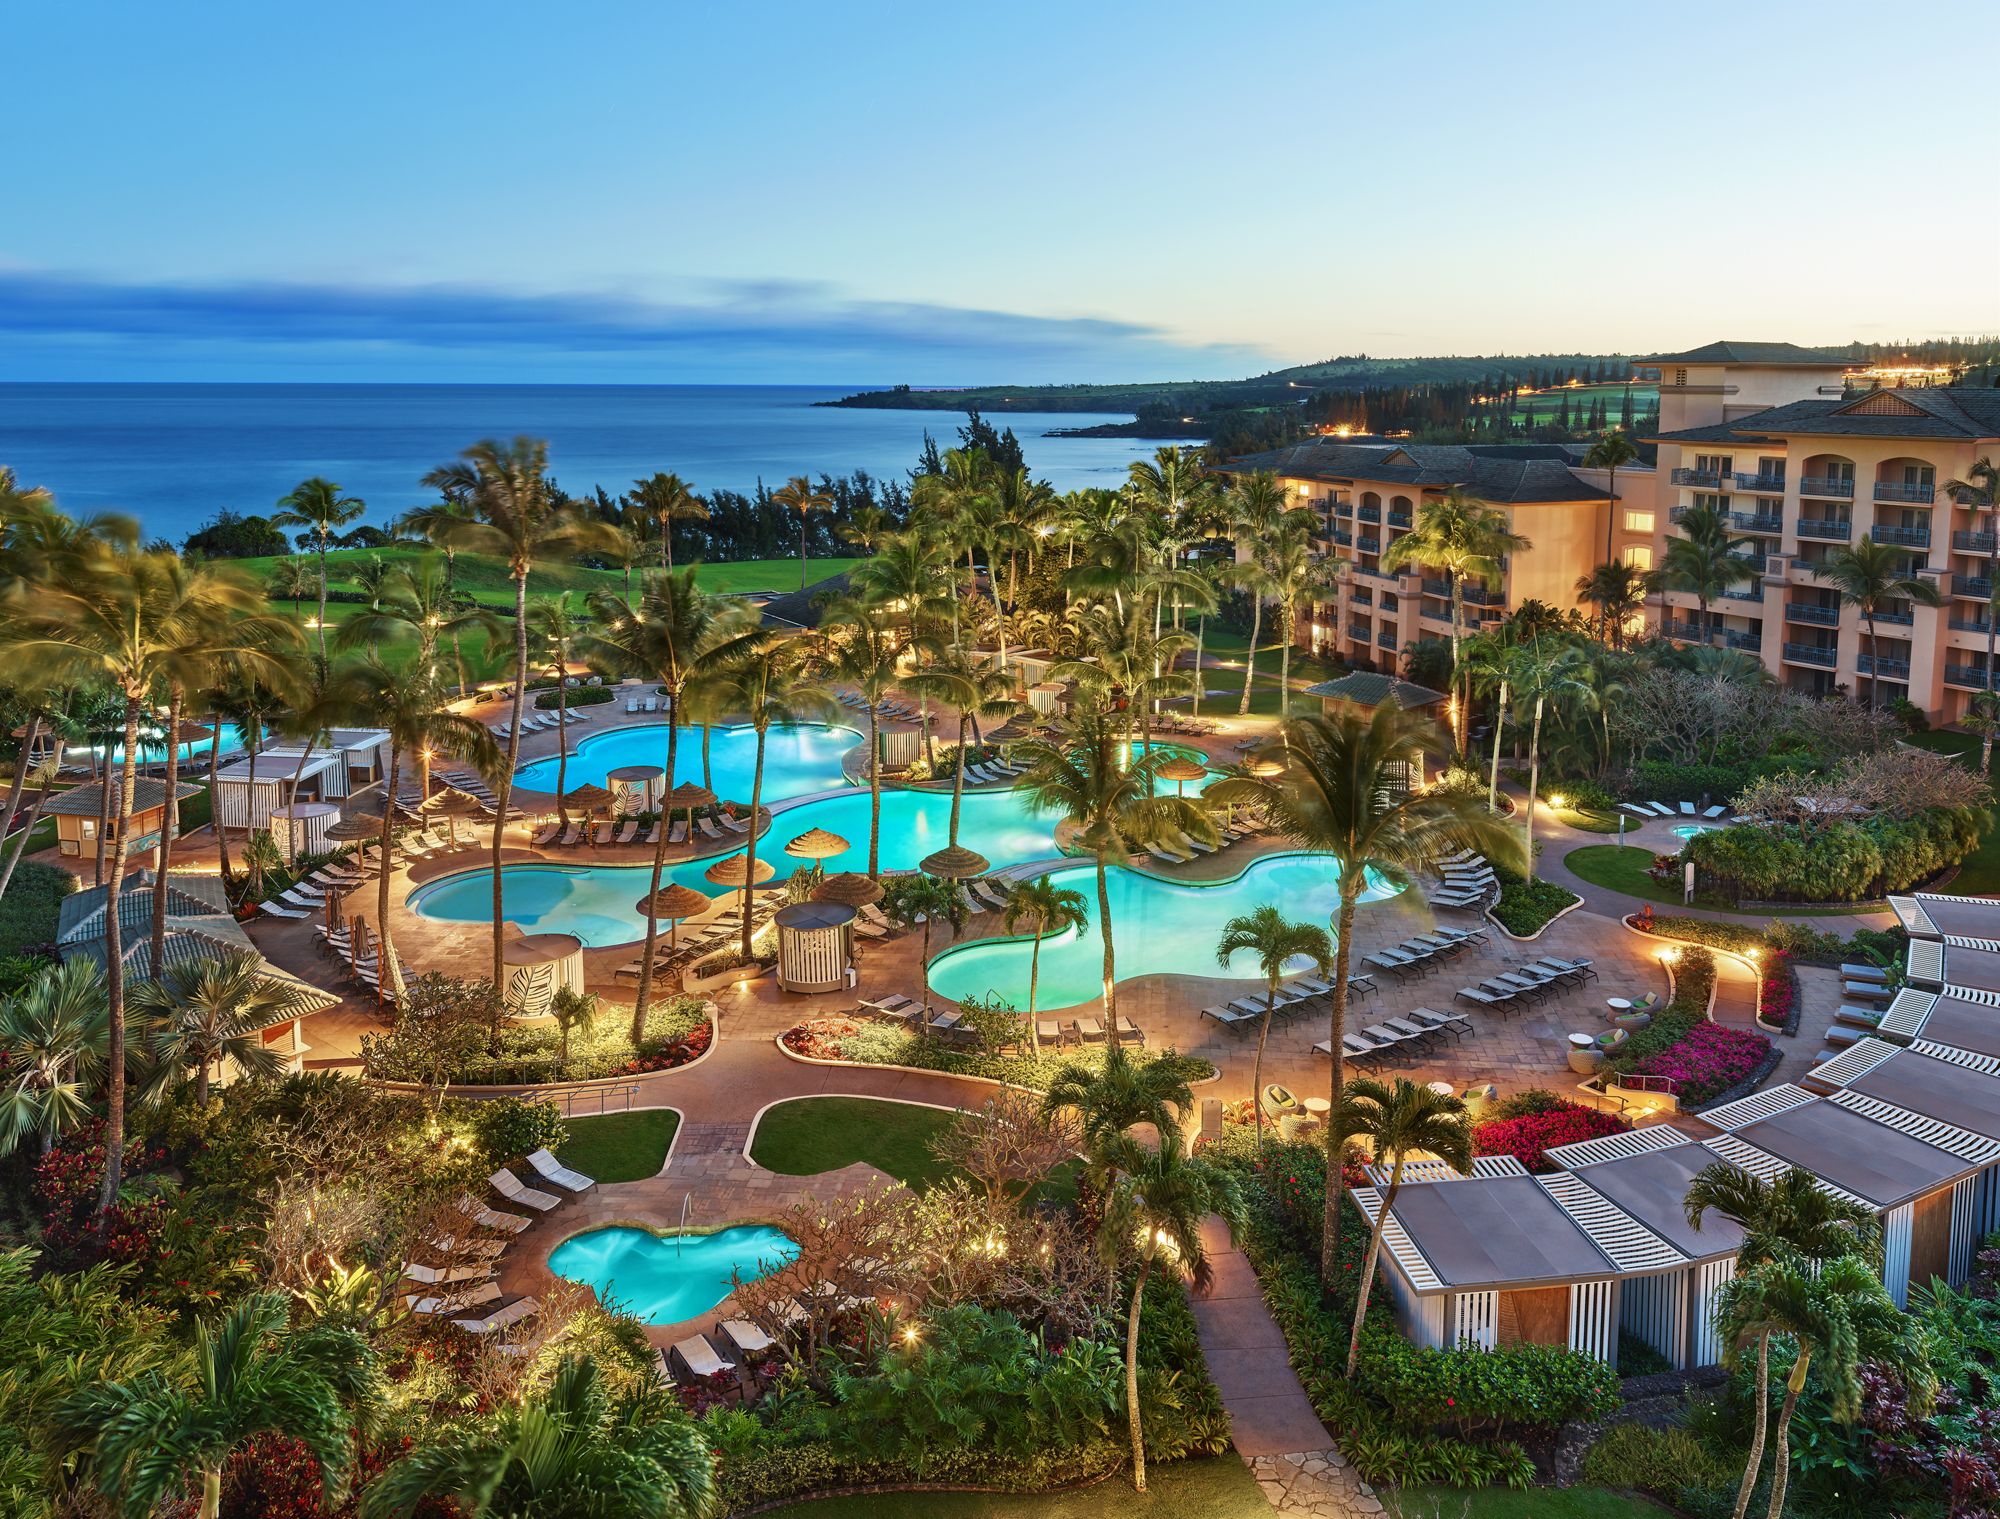 Previous to joining the team at The Ritz-Carlton Kapalua Kucherer spent the past 12 years at the JW Marriott Starr Pass Res